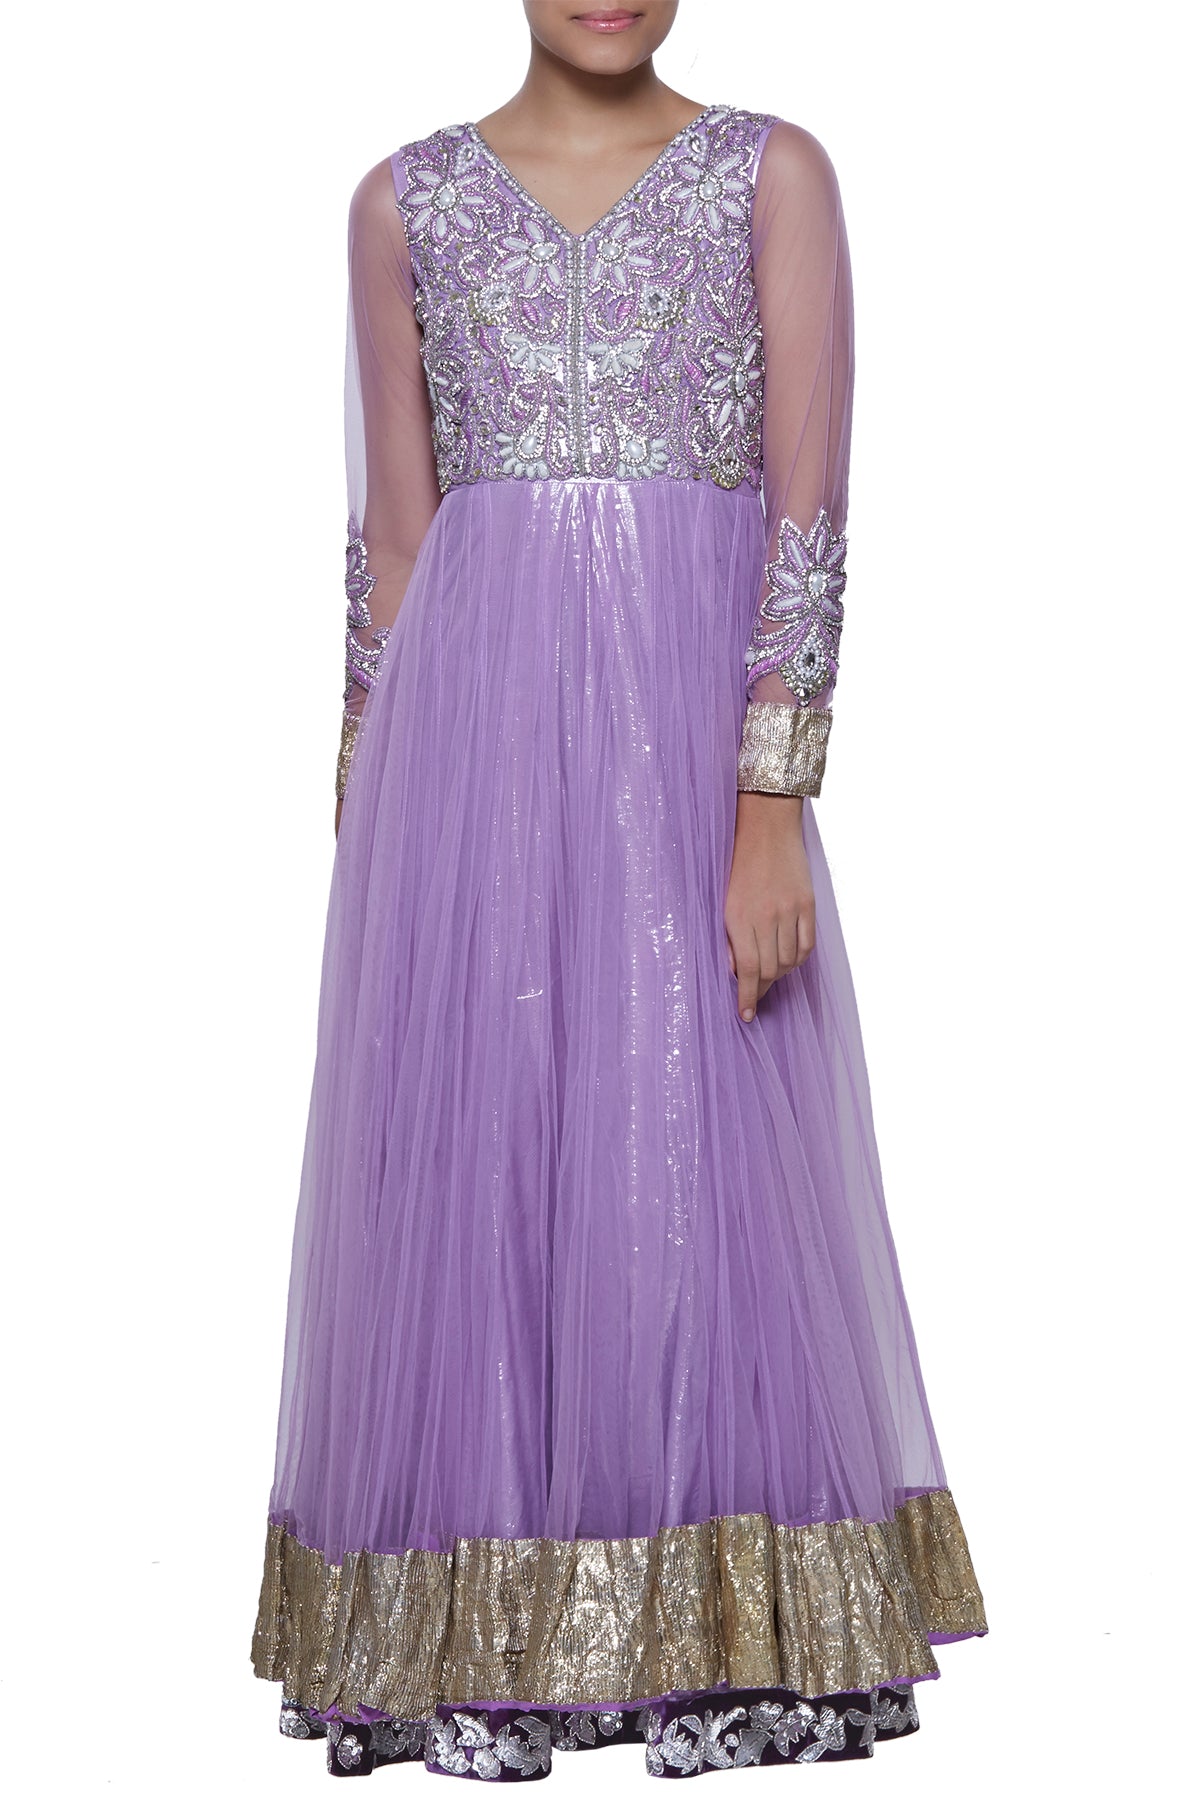 With a mirage of pearl stones, a lilac embroidered bodice and full sleeves in net - glide into your next traditional function with grace. Seal the deal with the outfit's gota border which makes it stylish head to toe.